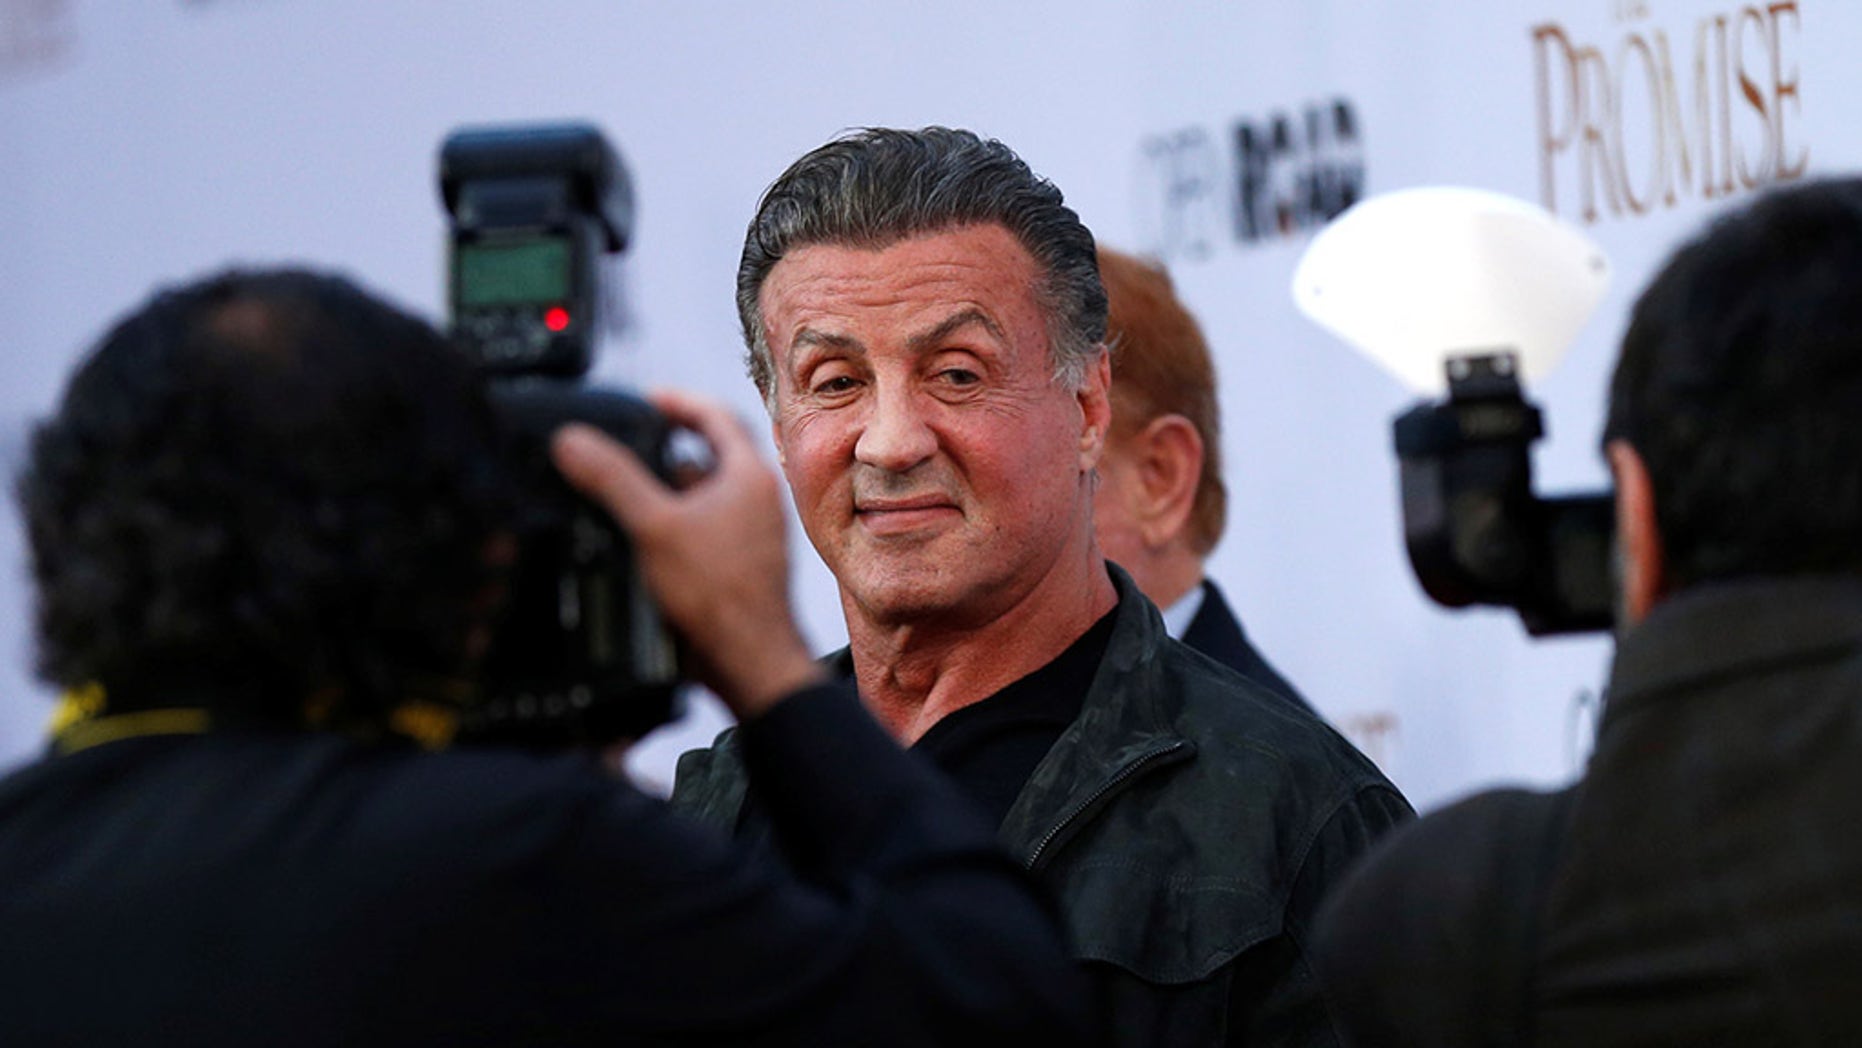 Sylvester Stallone spoke Wednesday of the end of his iconic role in the film Rocky Balboa.